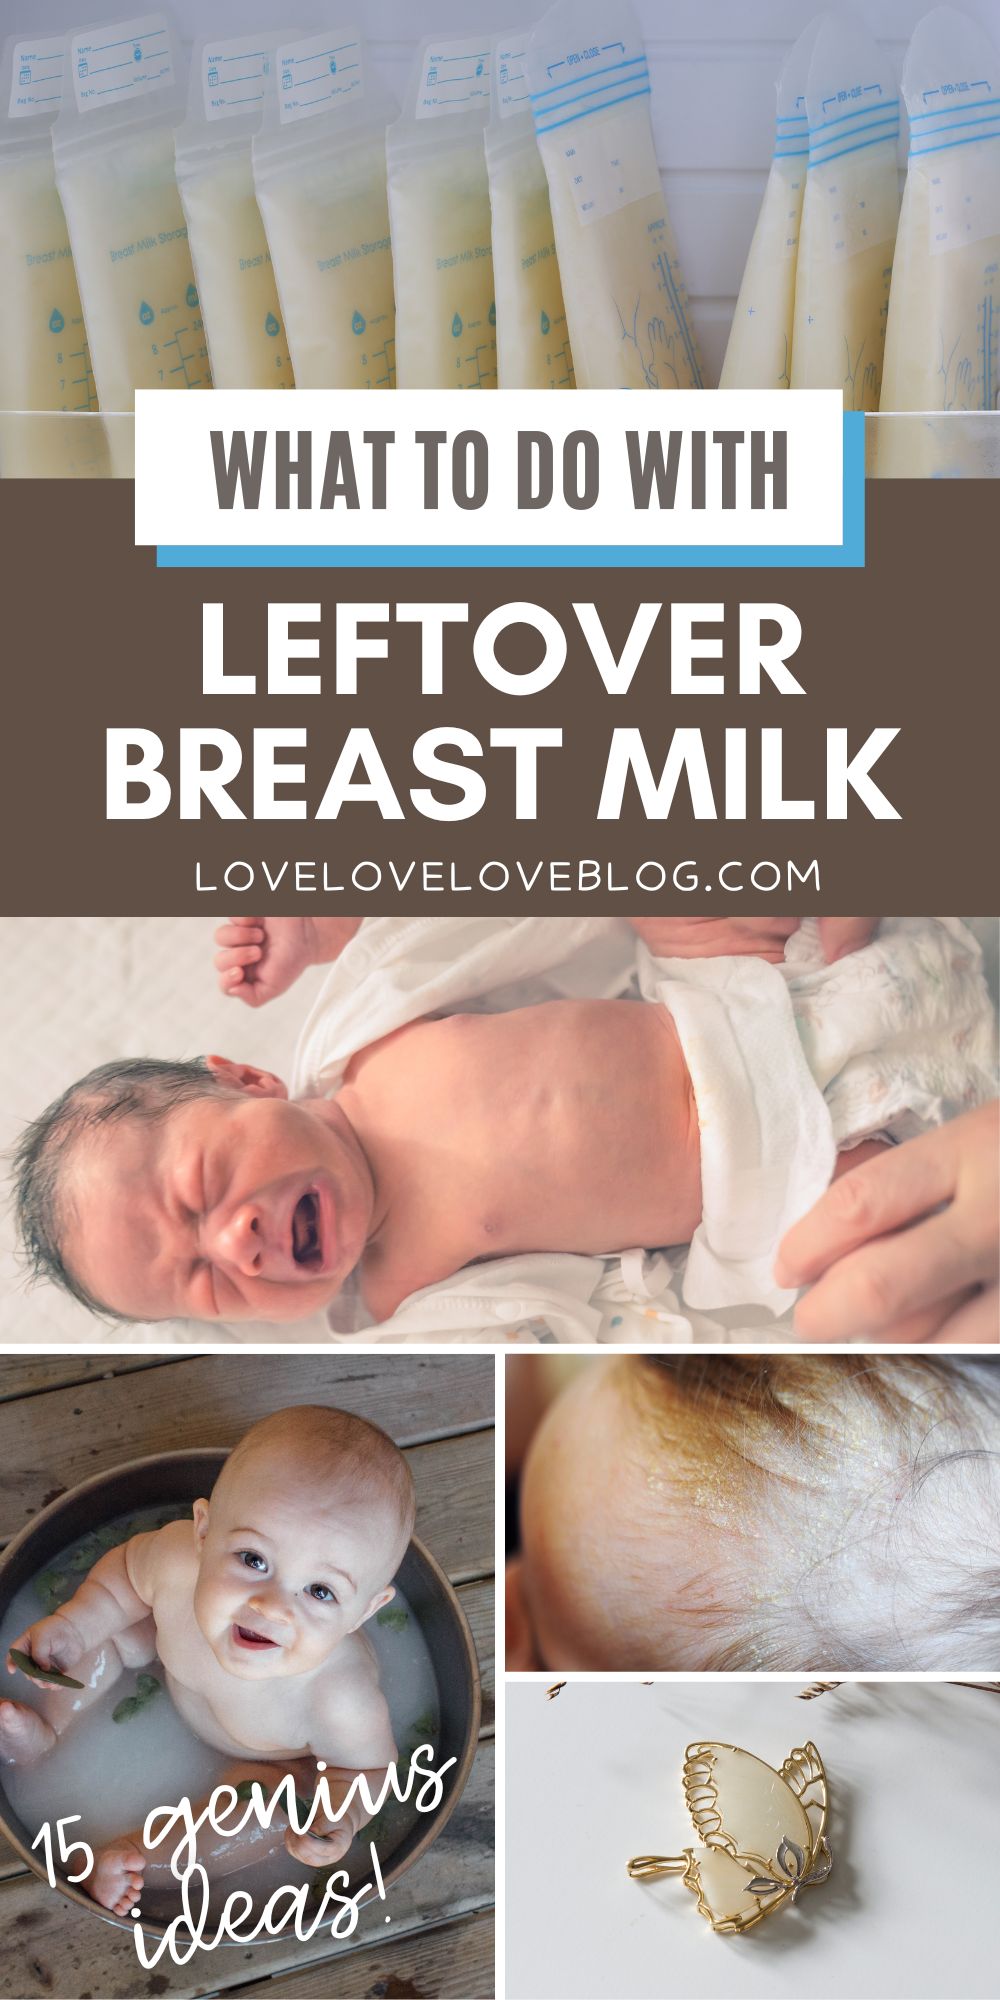 Pinterest graphic with text and collage of leftover breast milk ideas.